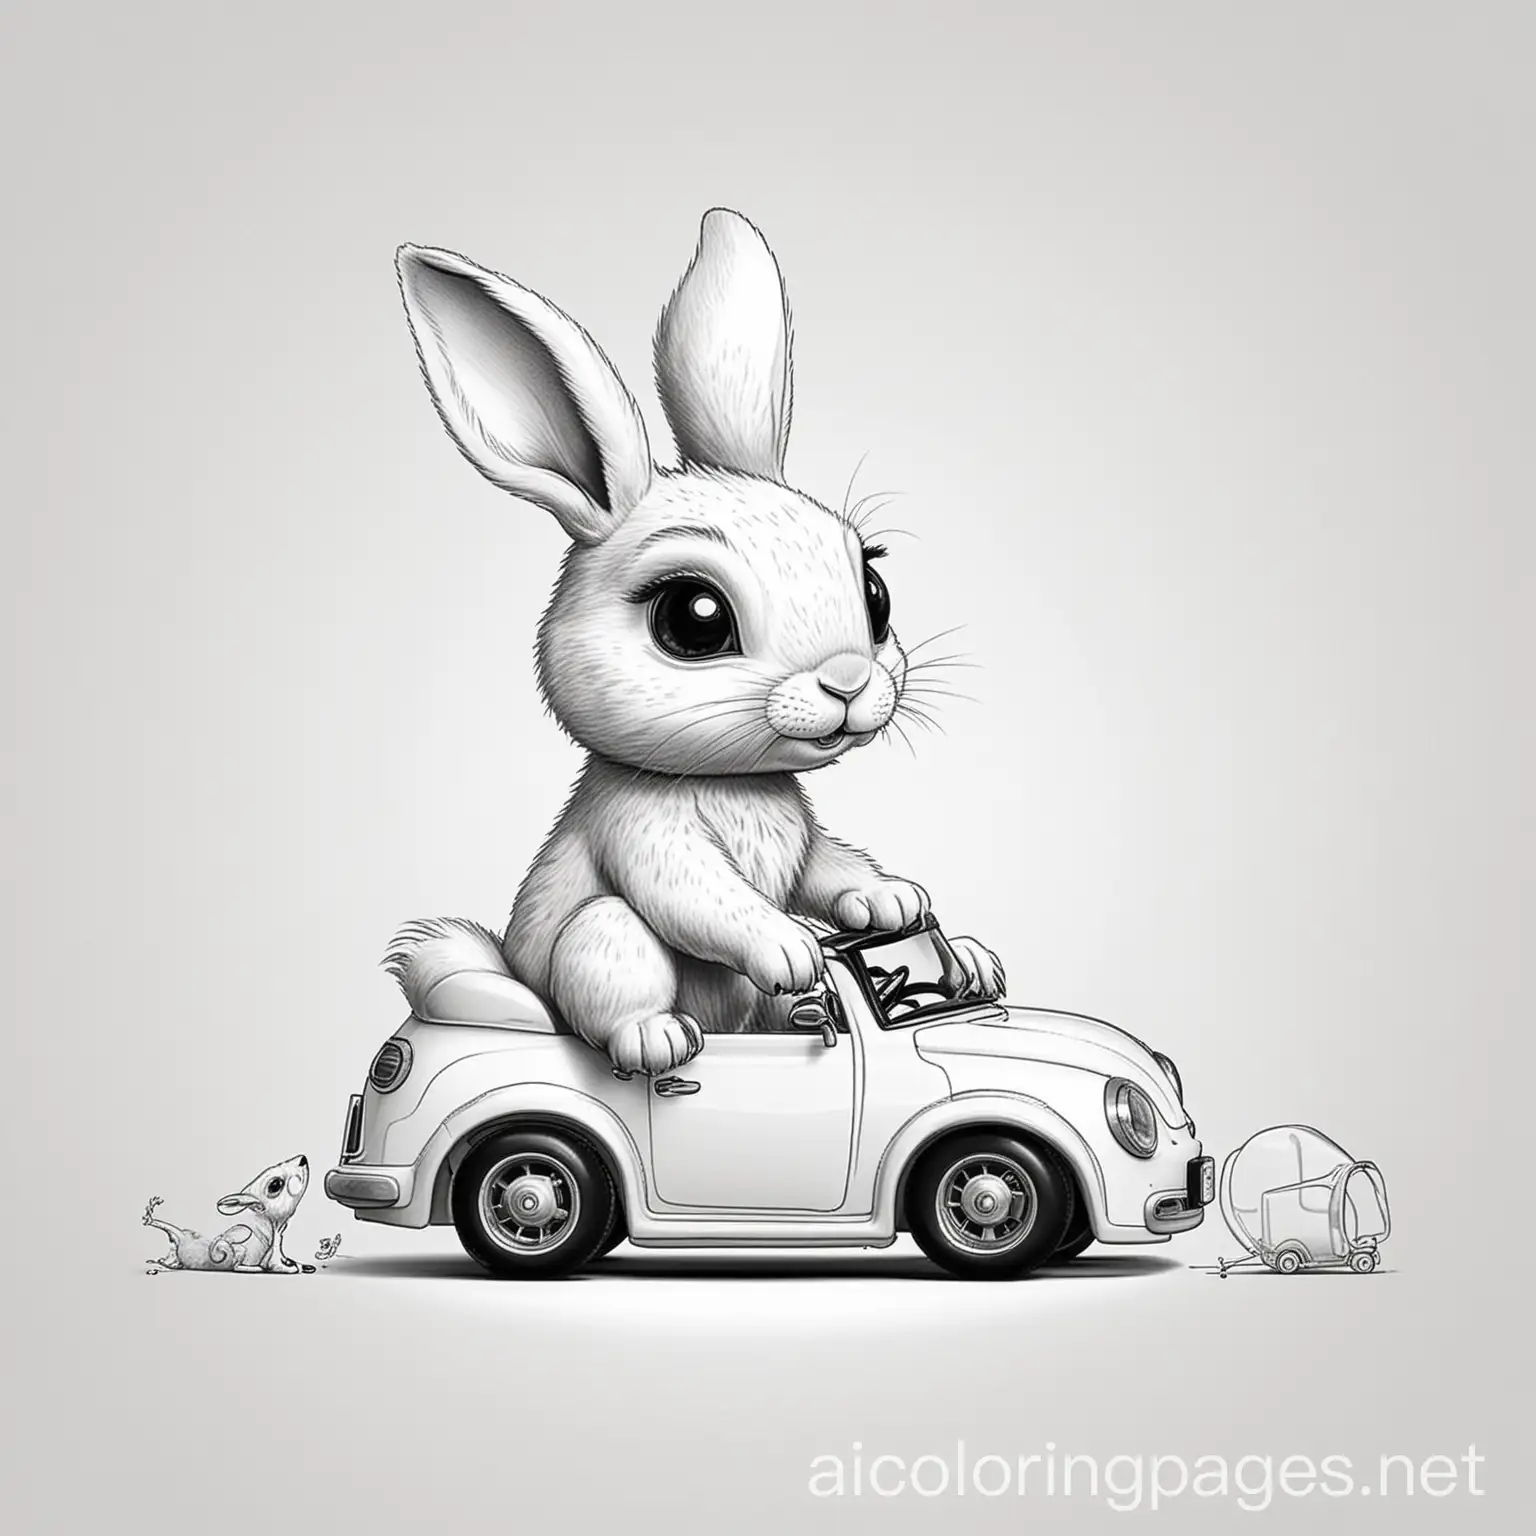 Cute hare plays with a toy car, Coloring Page, black and white, line art, white background, Simplicity, Ample White Space. The background of the coloring page is plain white to make it easy for young children to color within the lines. The outlines of all the subjects are easy to distinguish, making it simple for kids to color without too much difficulty